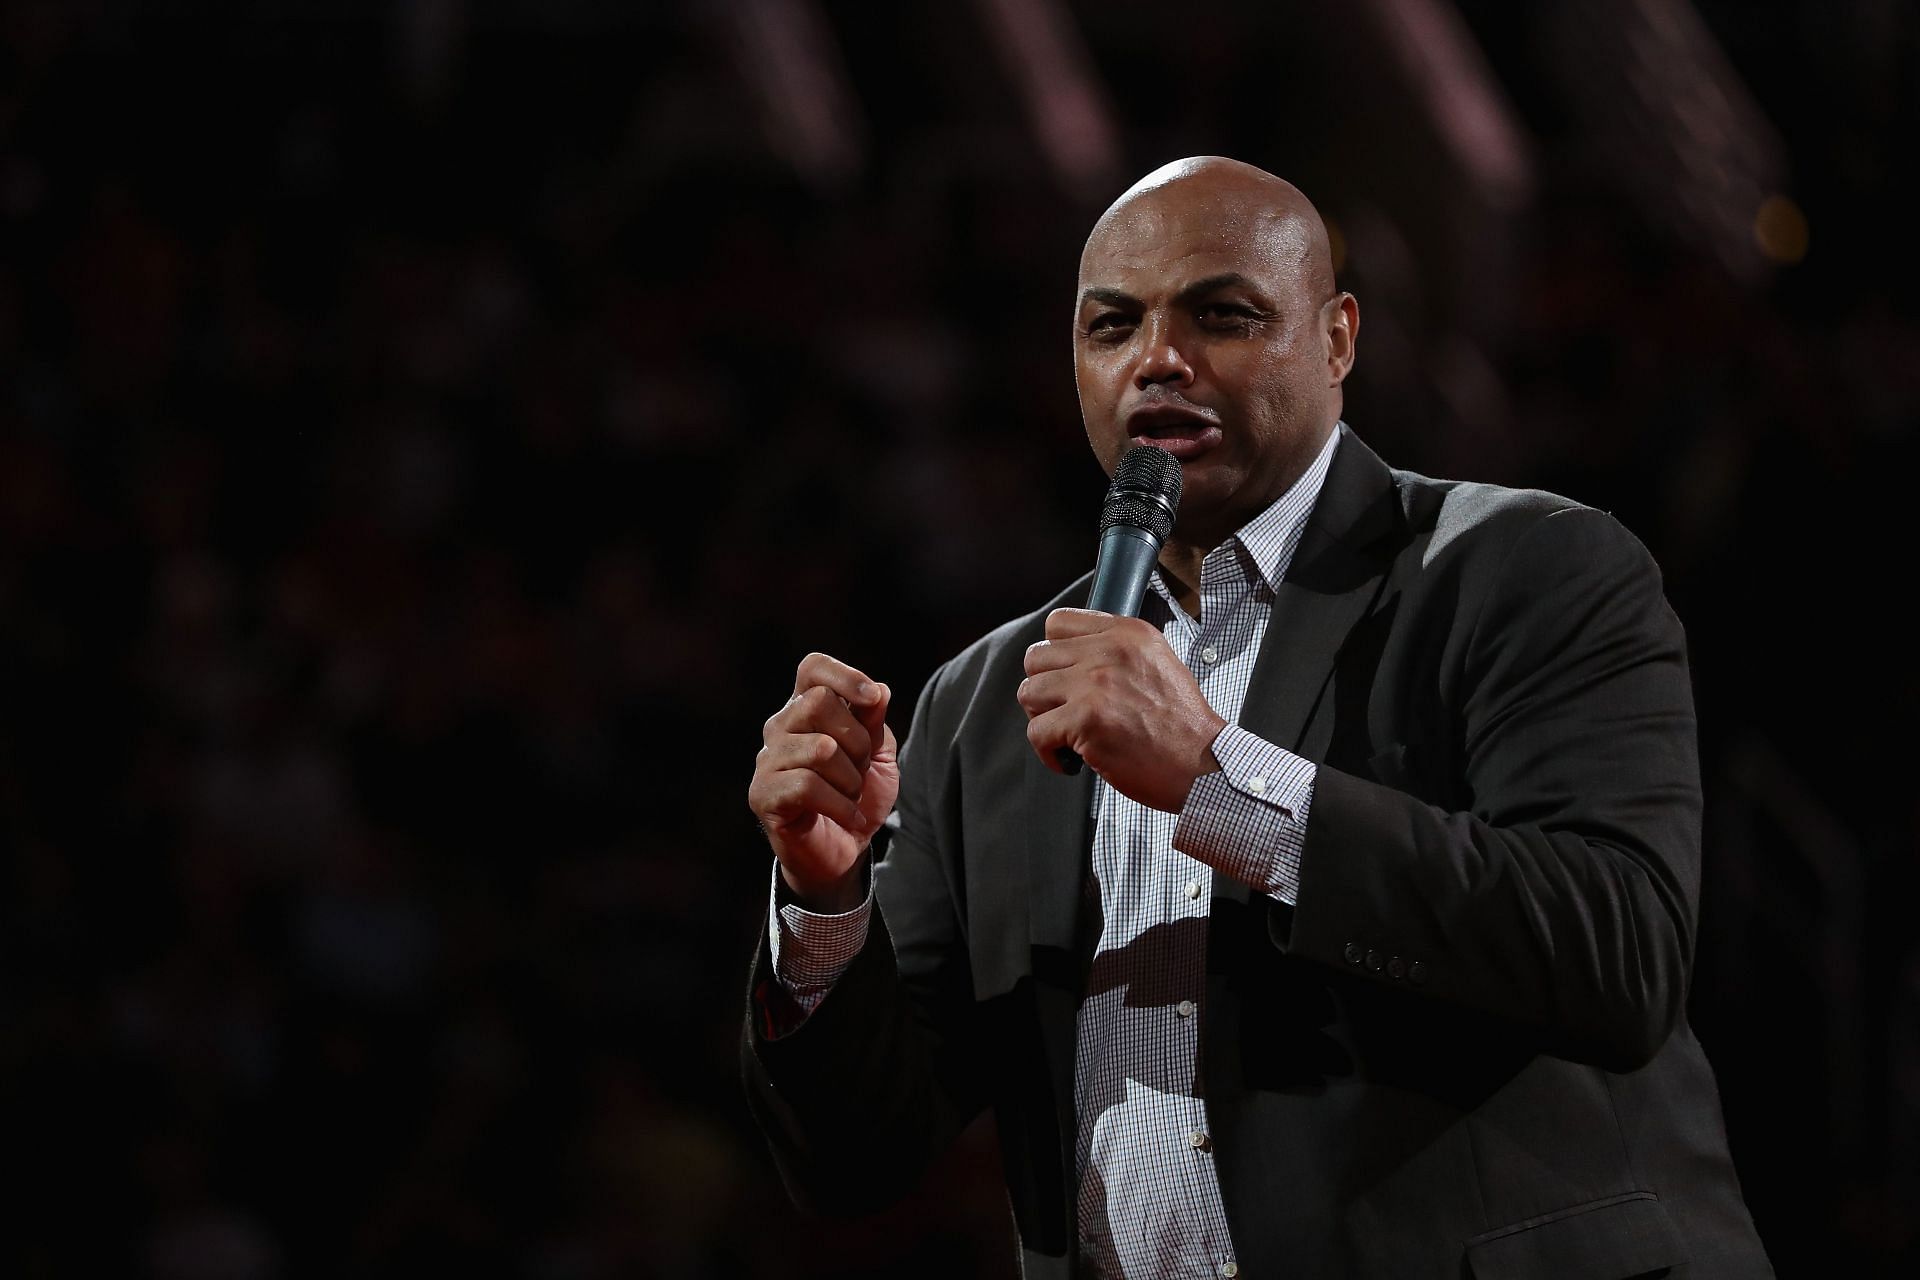 Charles Barkley during a game between the OKC Thunder and Phoenix Suns.